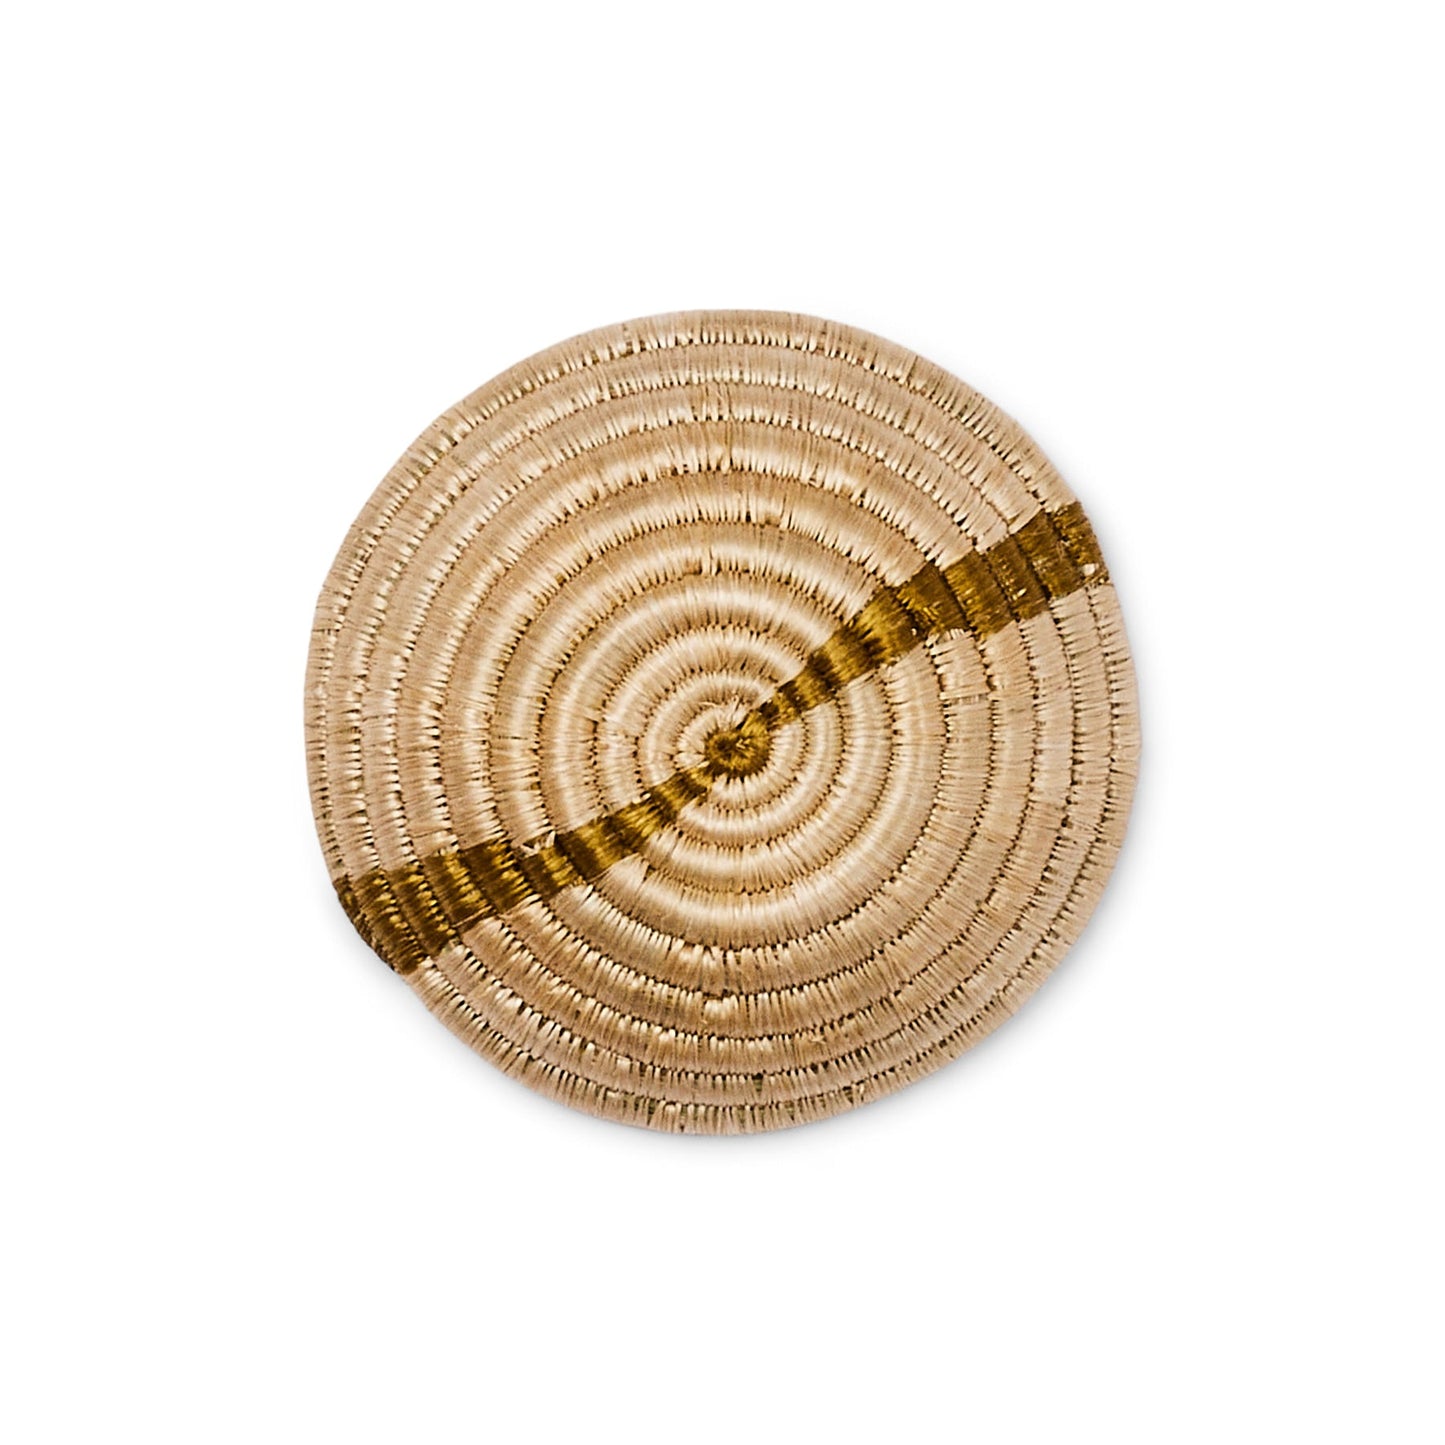 6" Small Striped Olive Round Basket | Home Decor